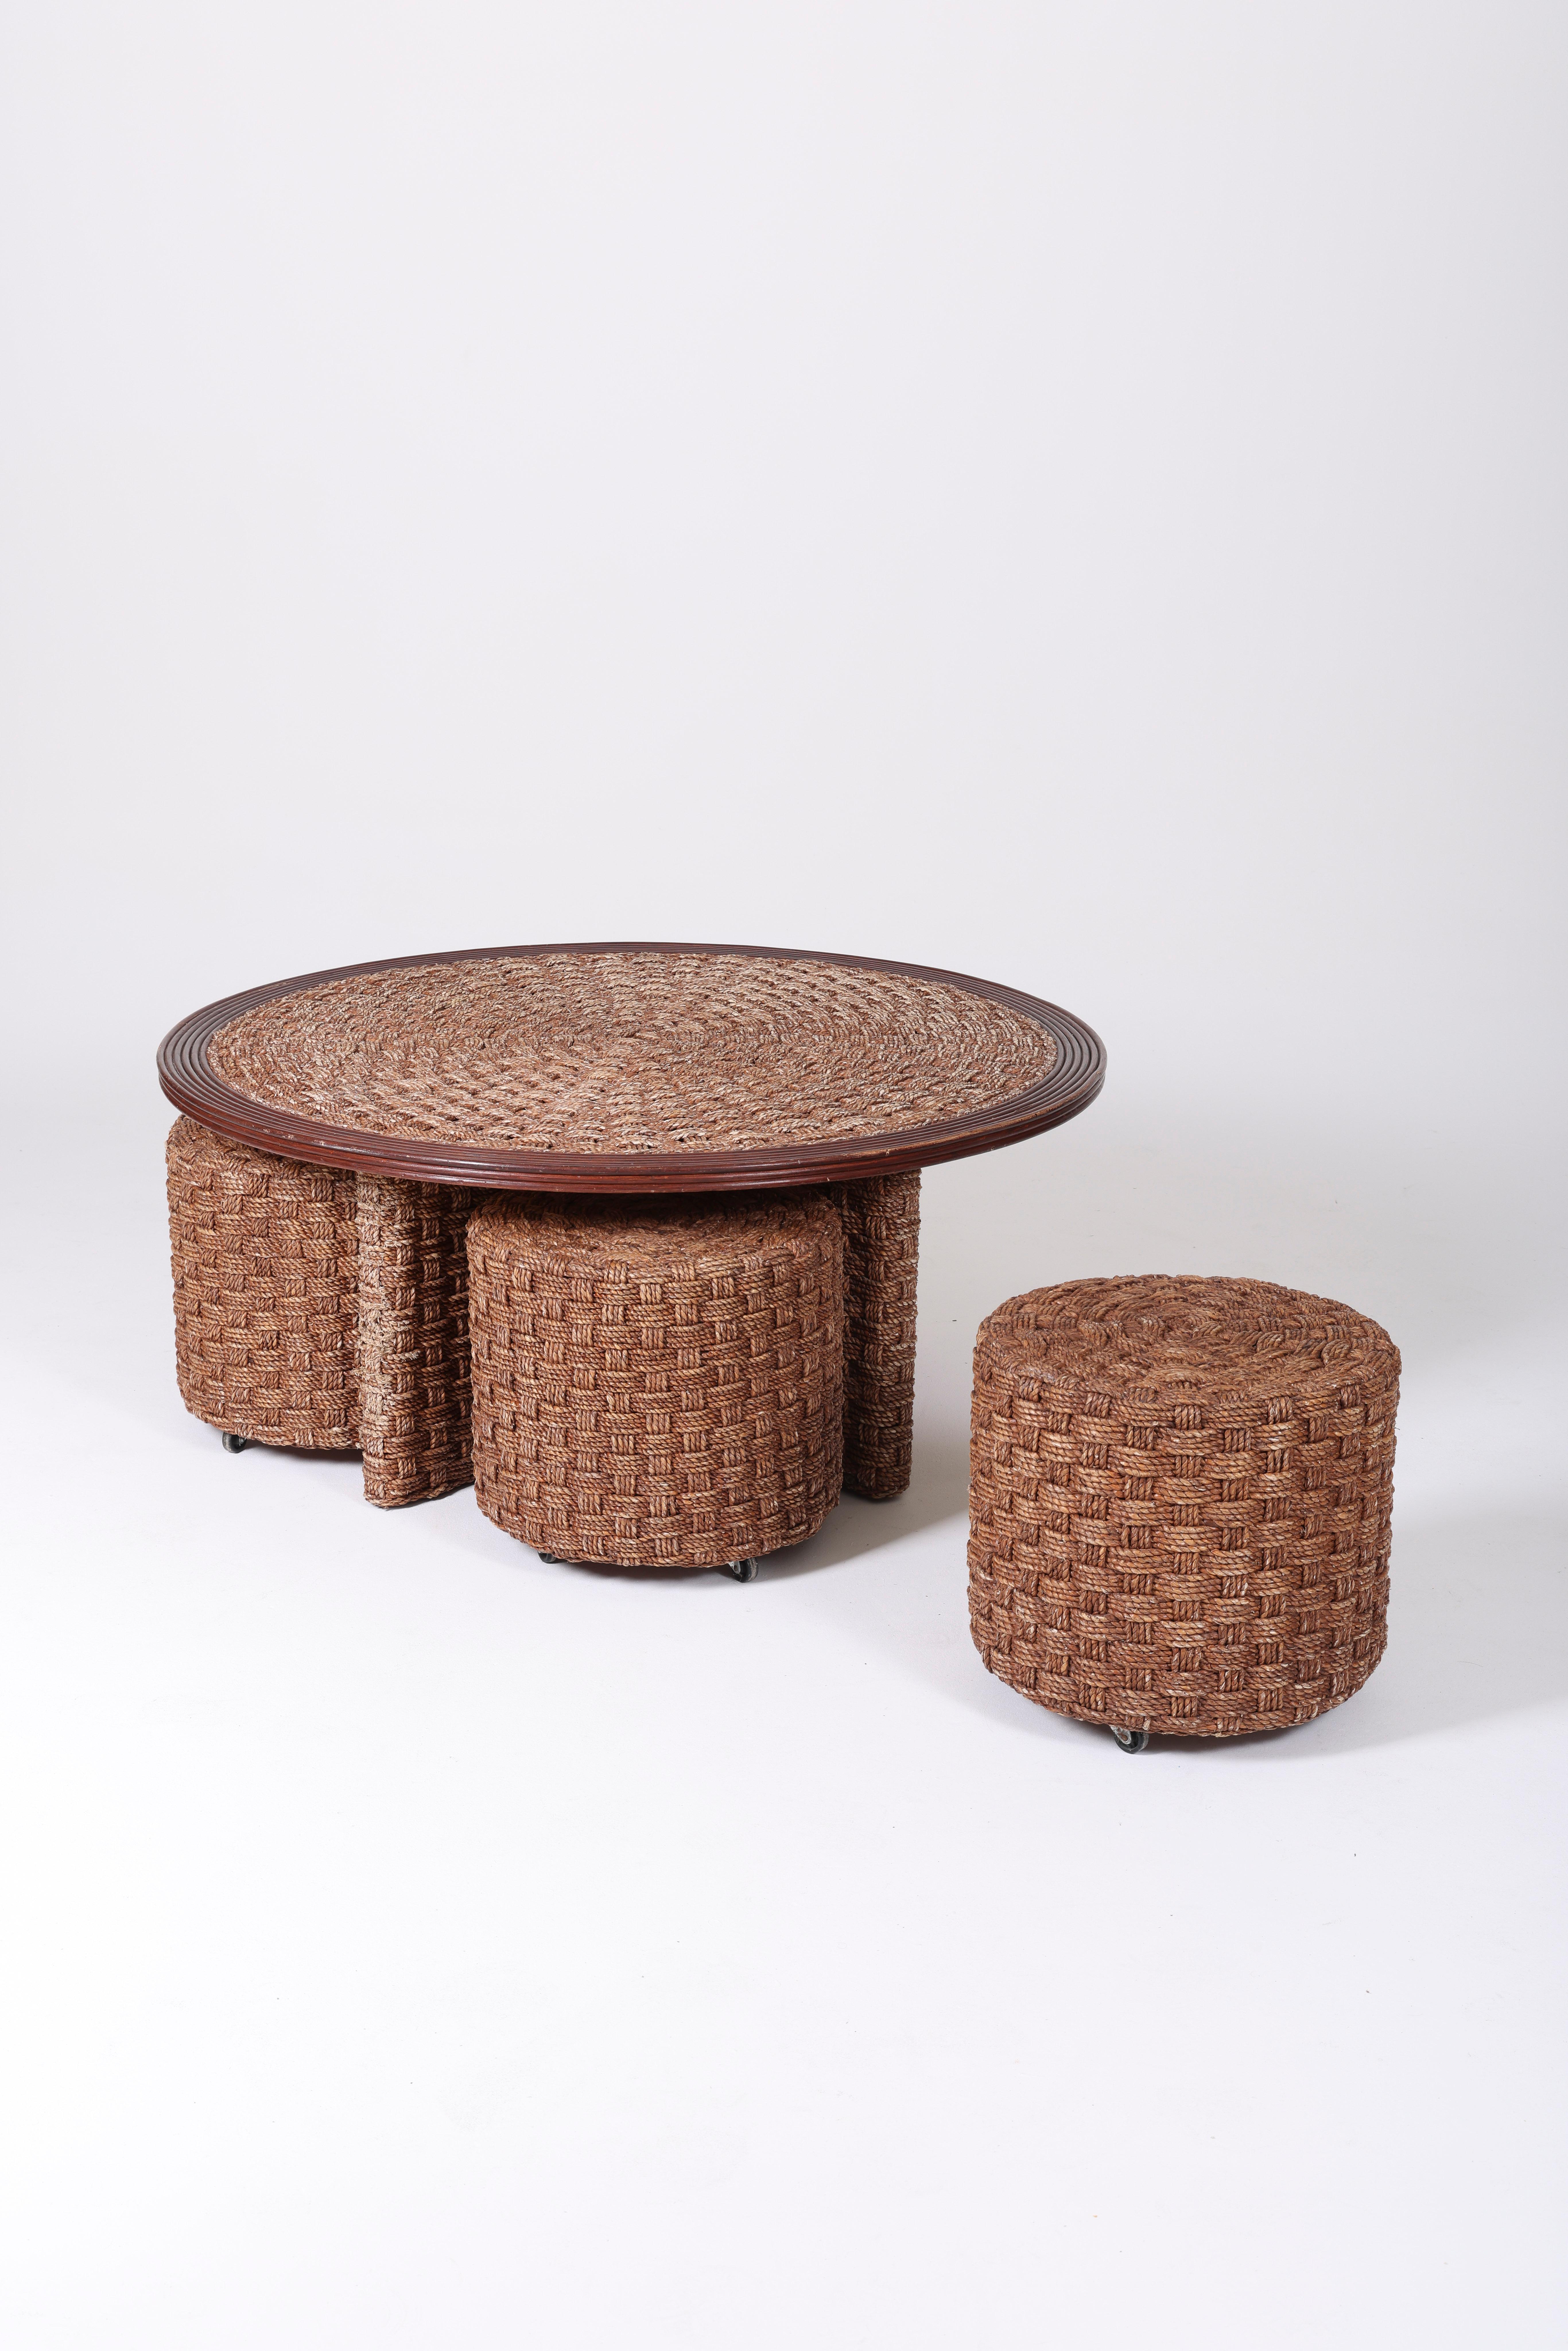 Coffee table and stools in woven rope and wood, mid-20th century For Sale 1